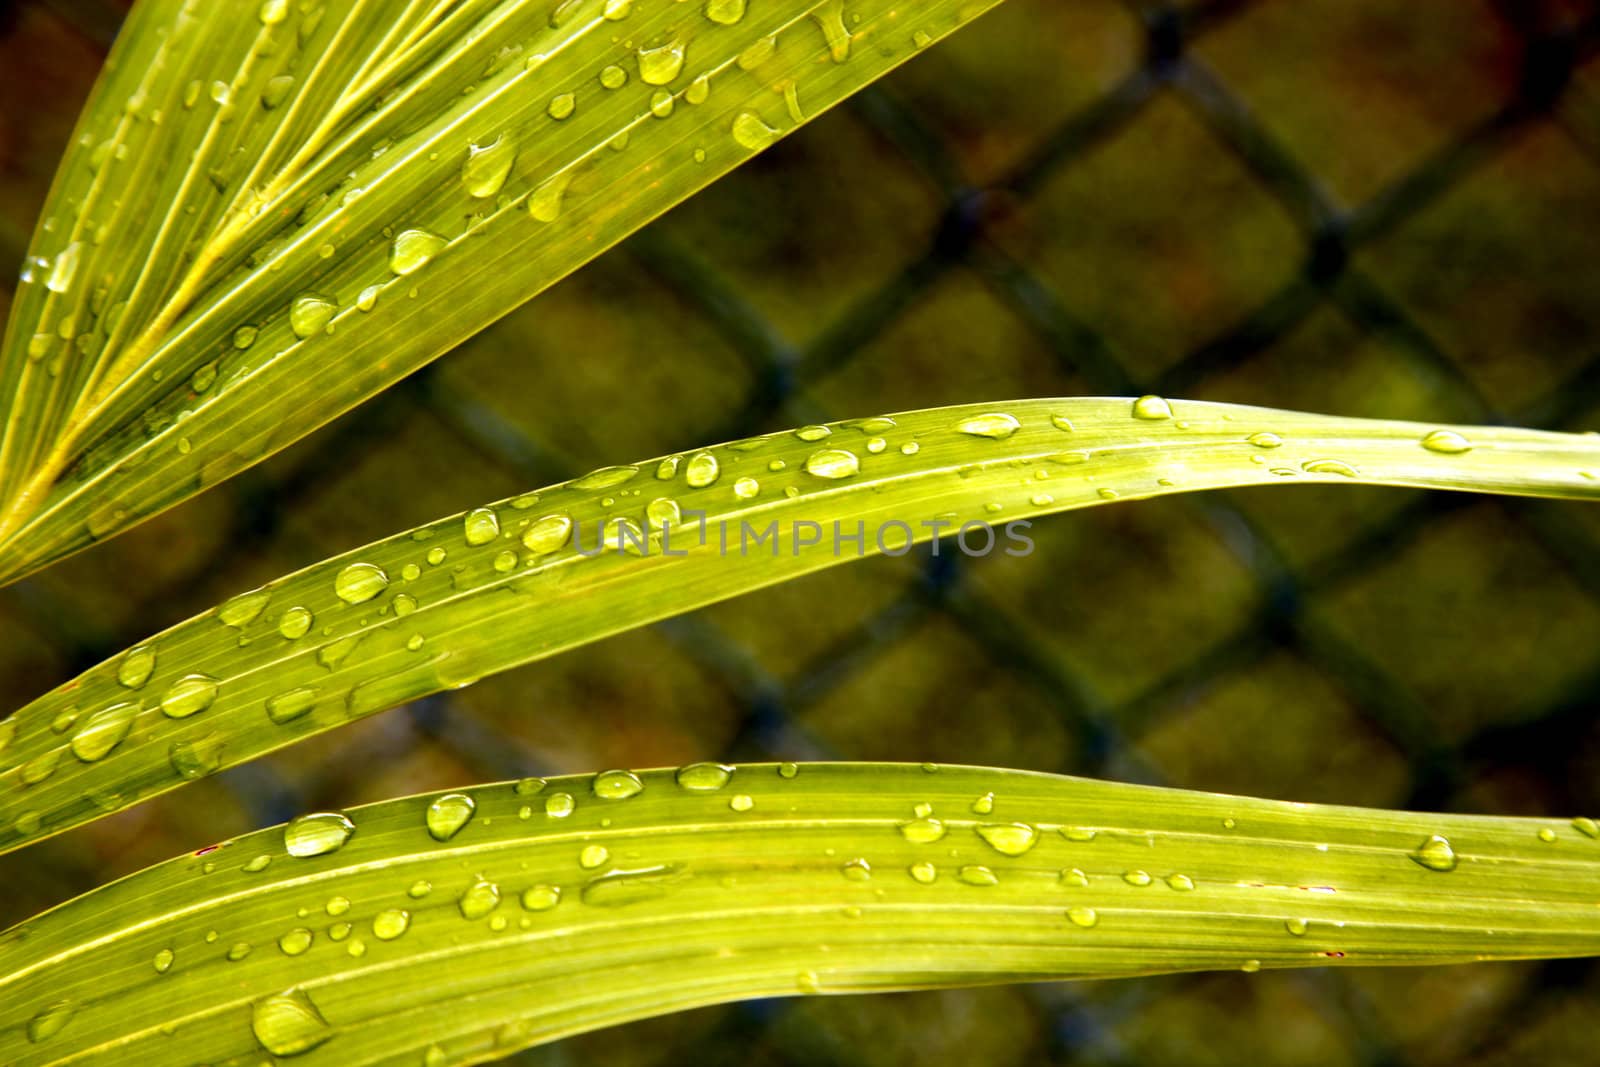 Droplets of water on large blades of leaf with a fence background.